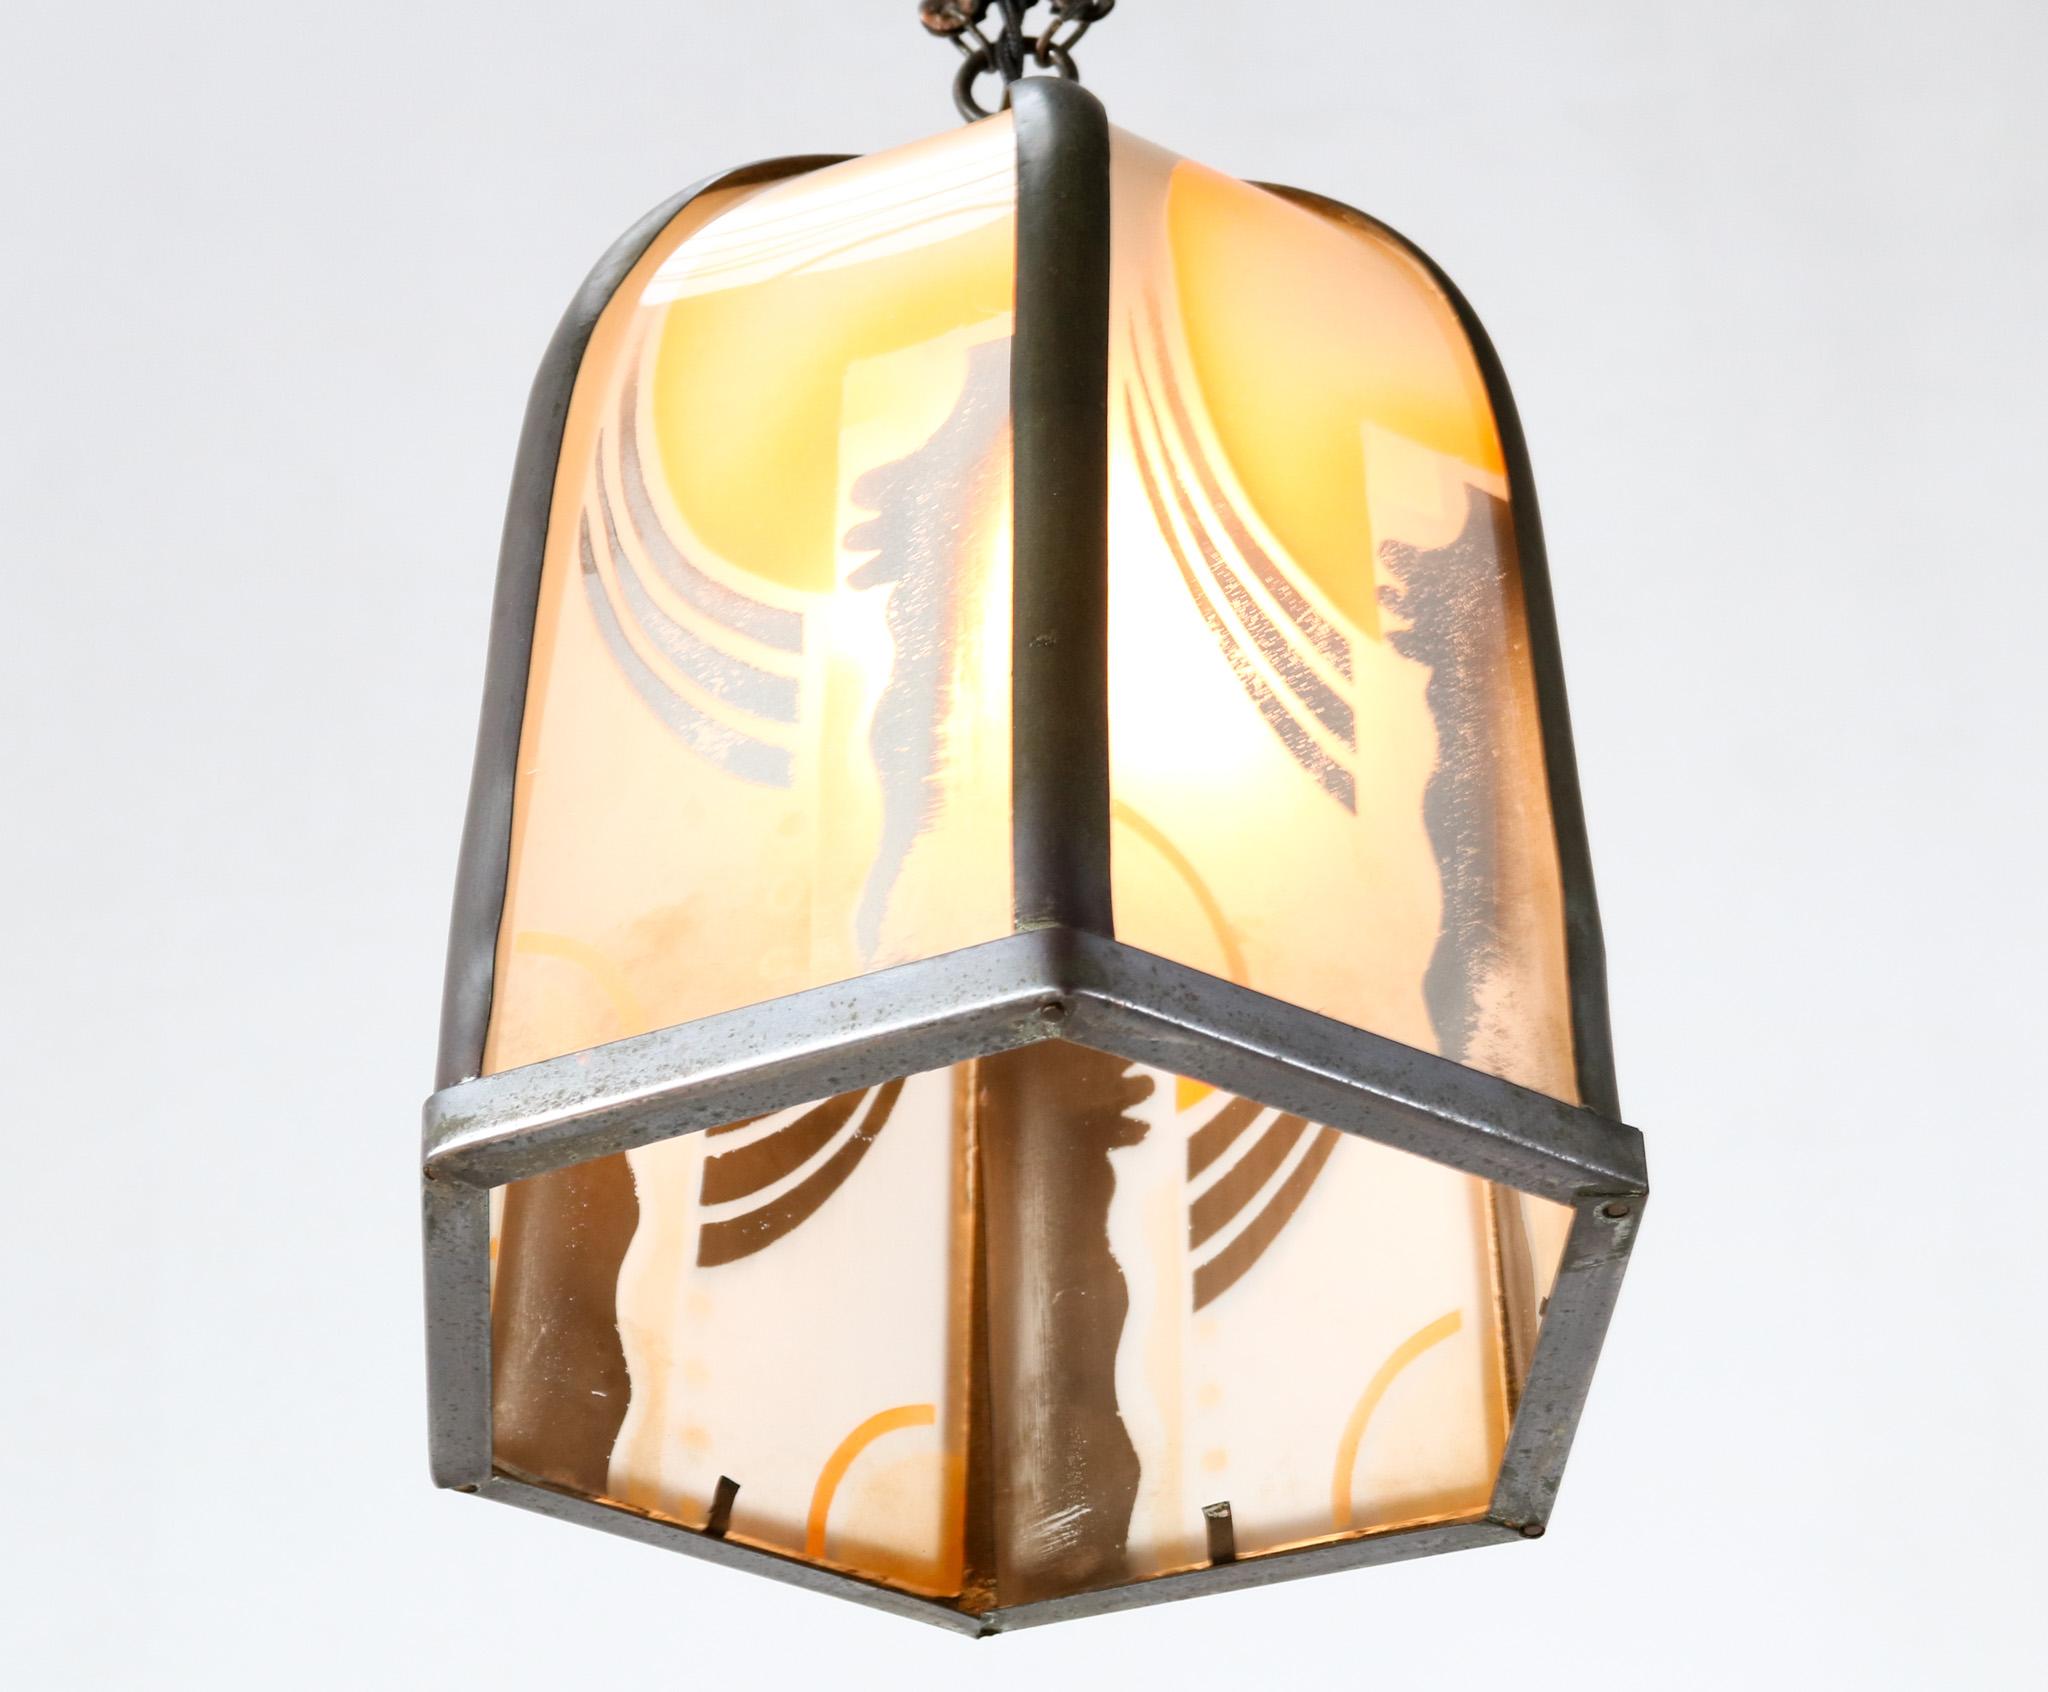 Glass Patinated Brass Art Deco Amsterdamse School Pendant Lamp, 1920s For Sale